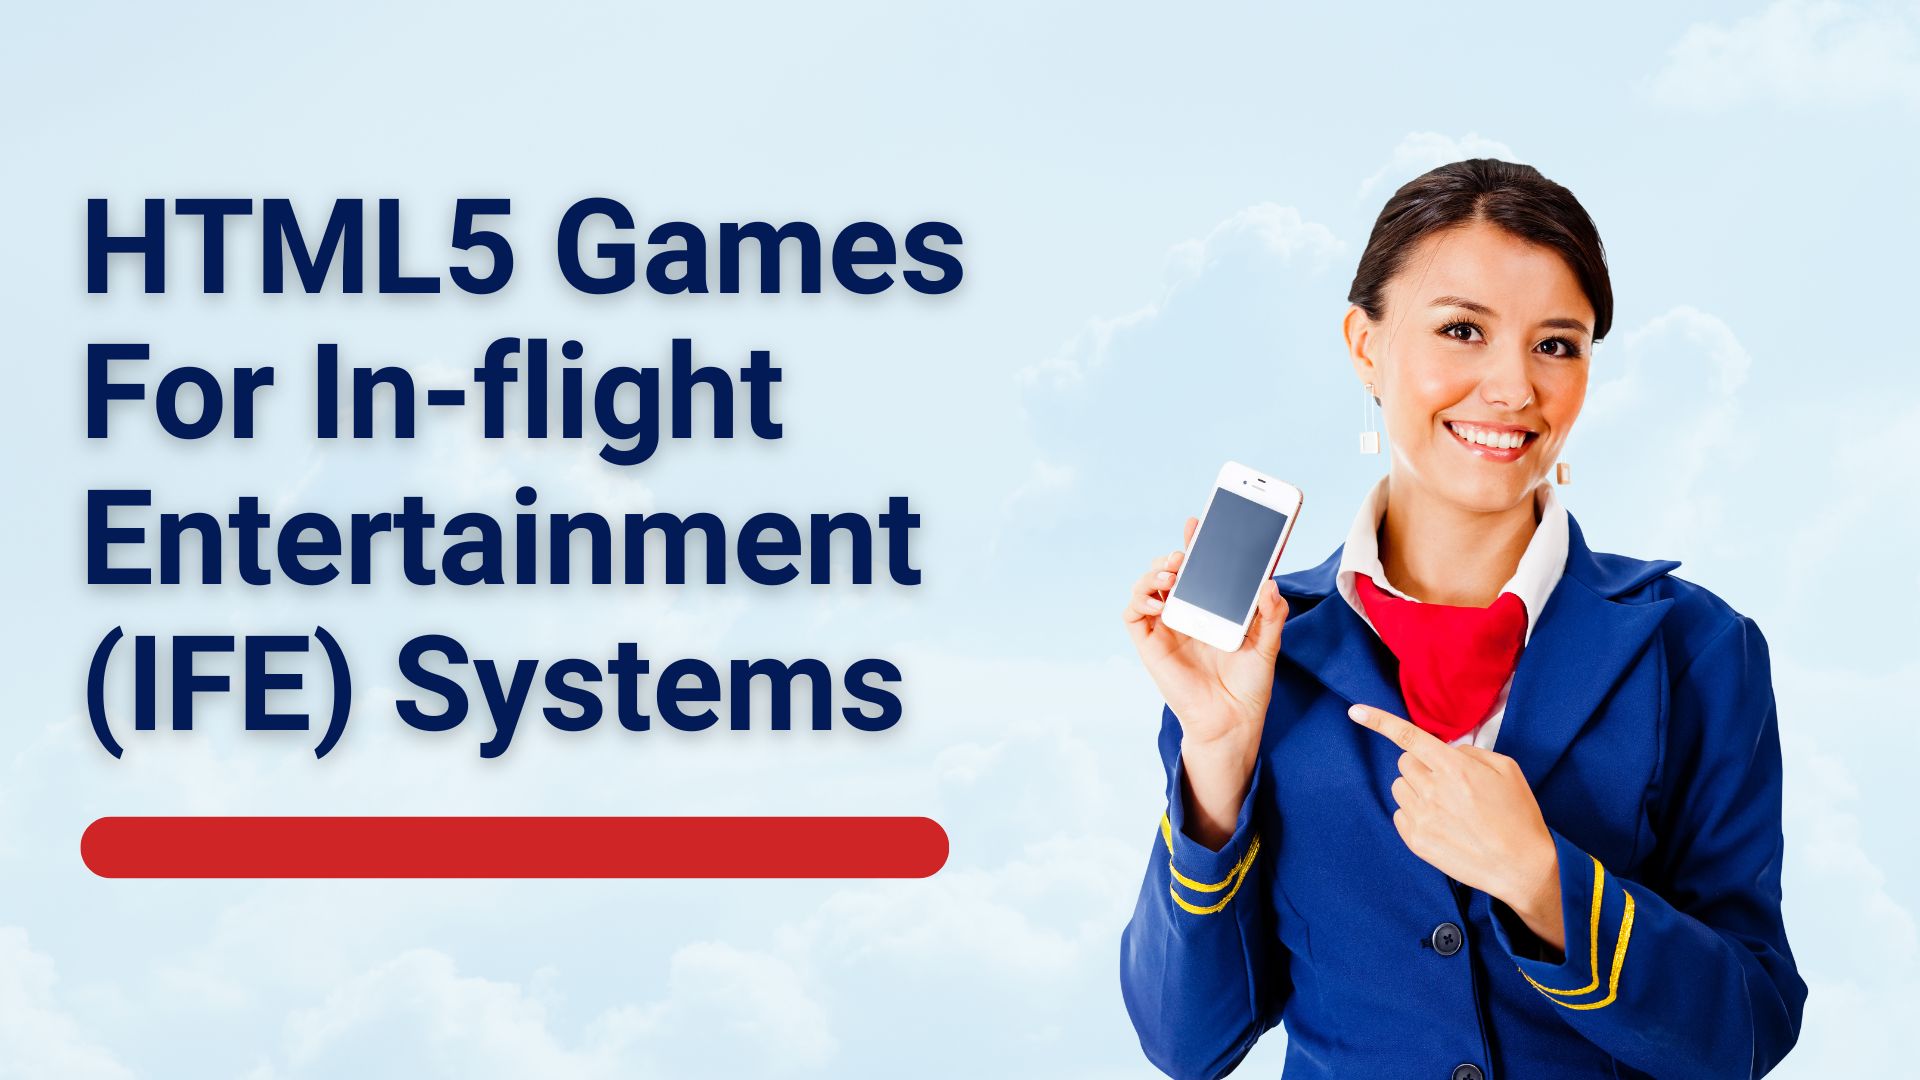 HTML5 Games For In-flight Entertainment (IFE) Systems